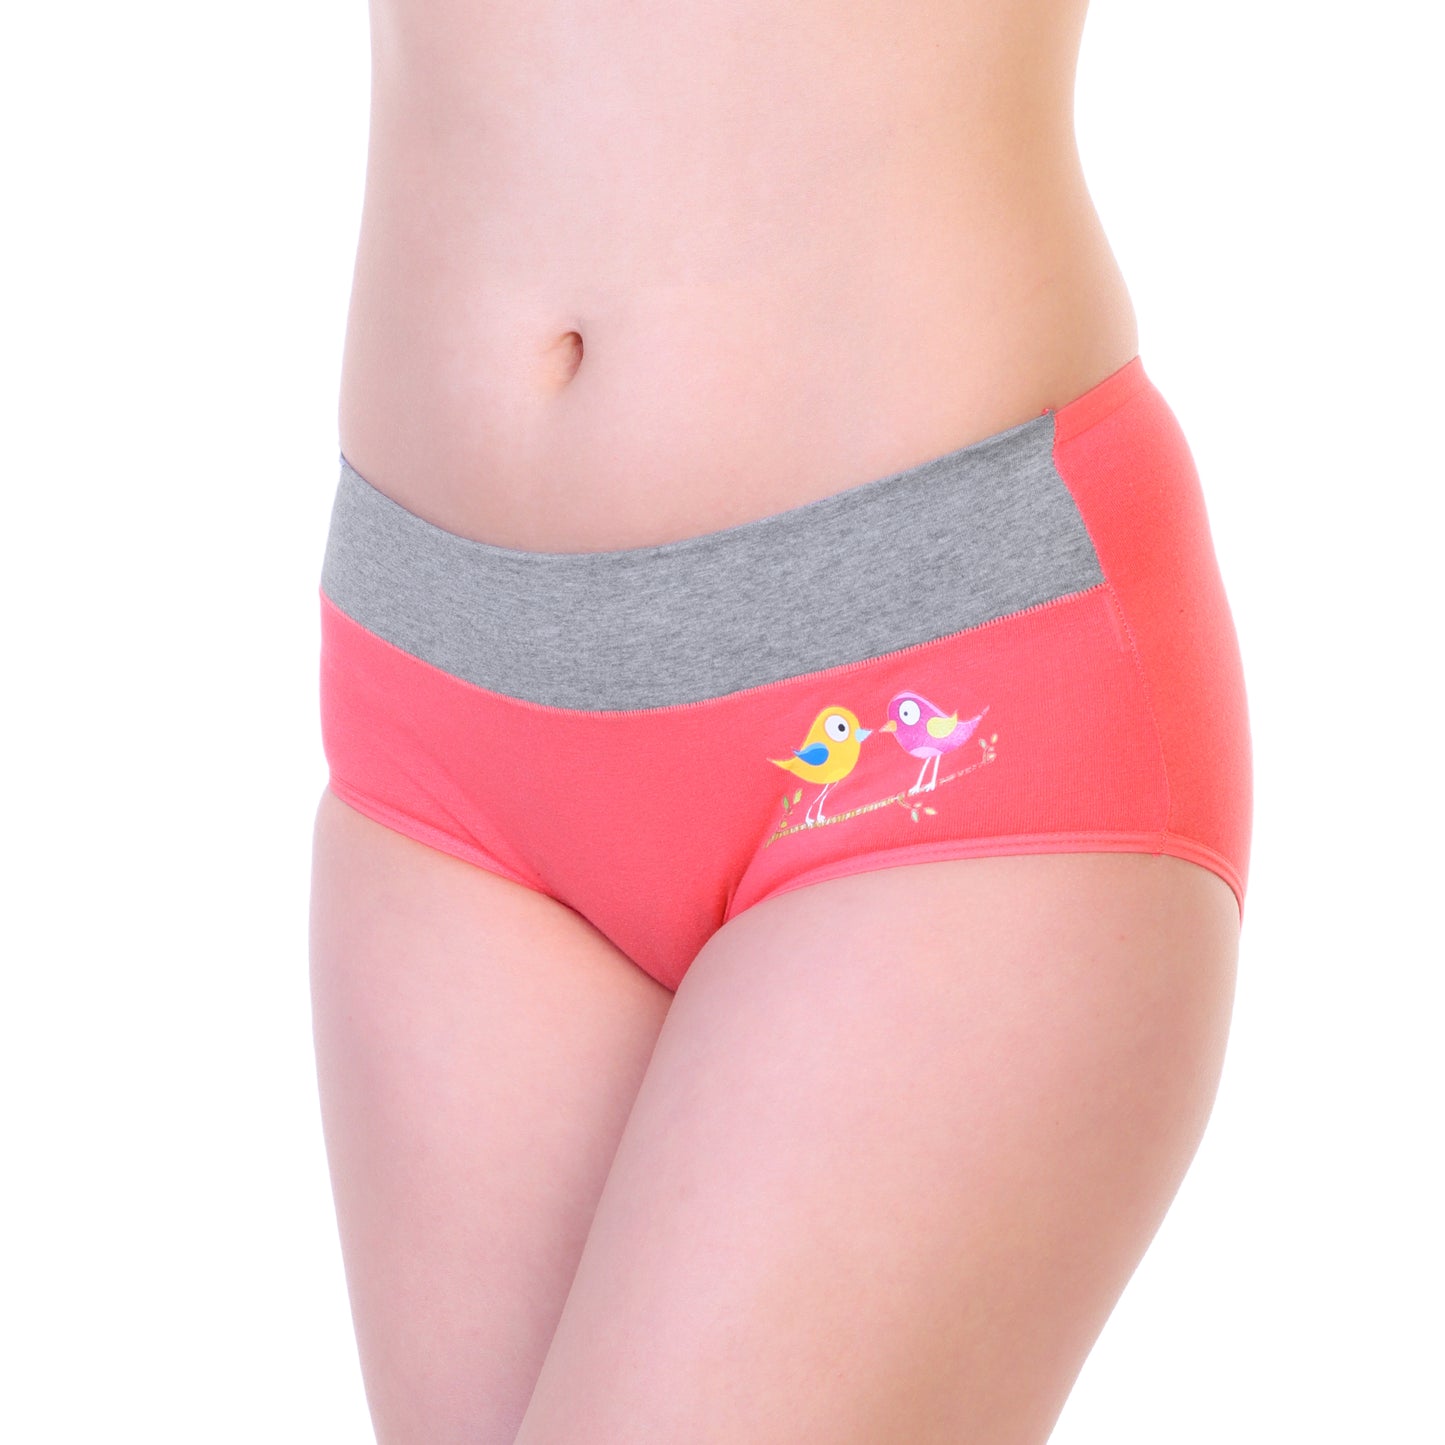 Angelina Cotton Comfort Mid-Rise Brief Panties with Bird Print Design (12-Pack), #G6656